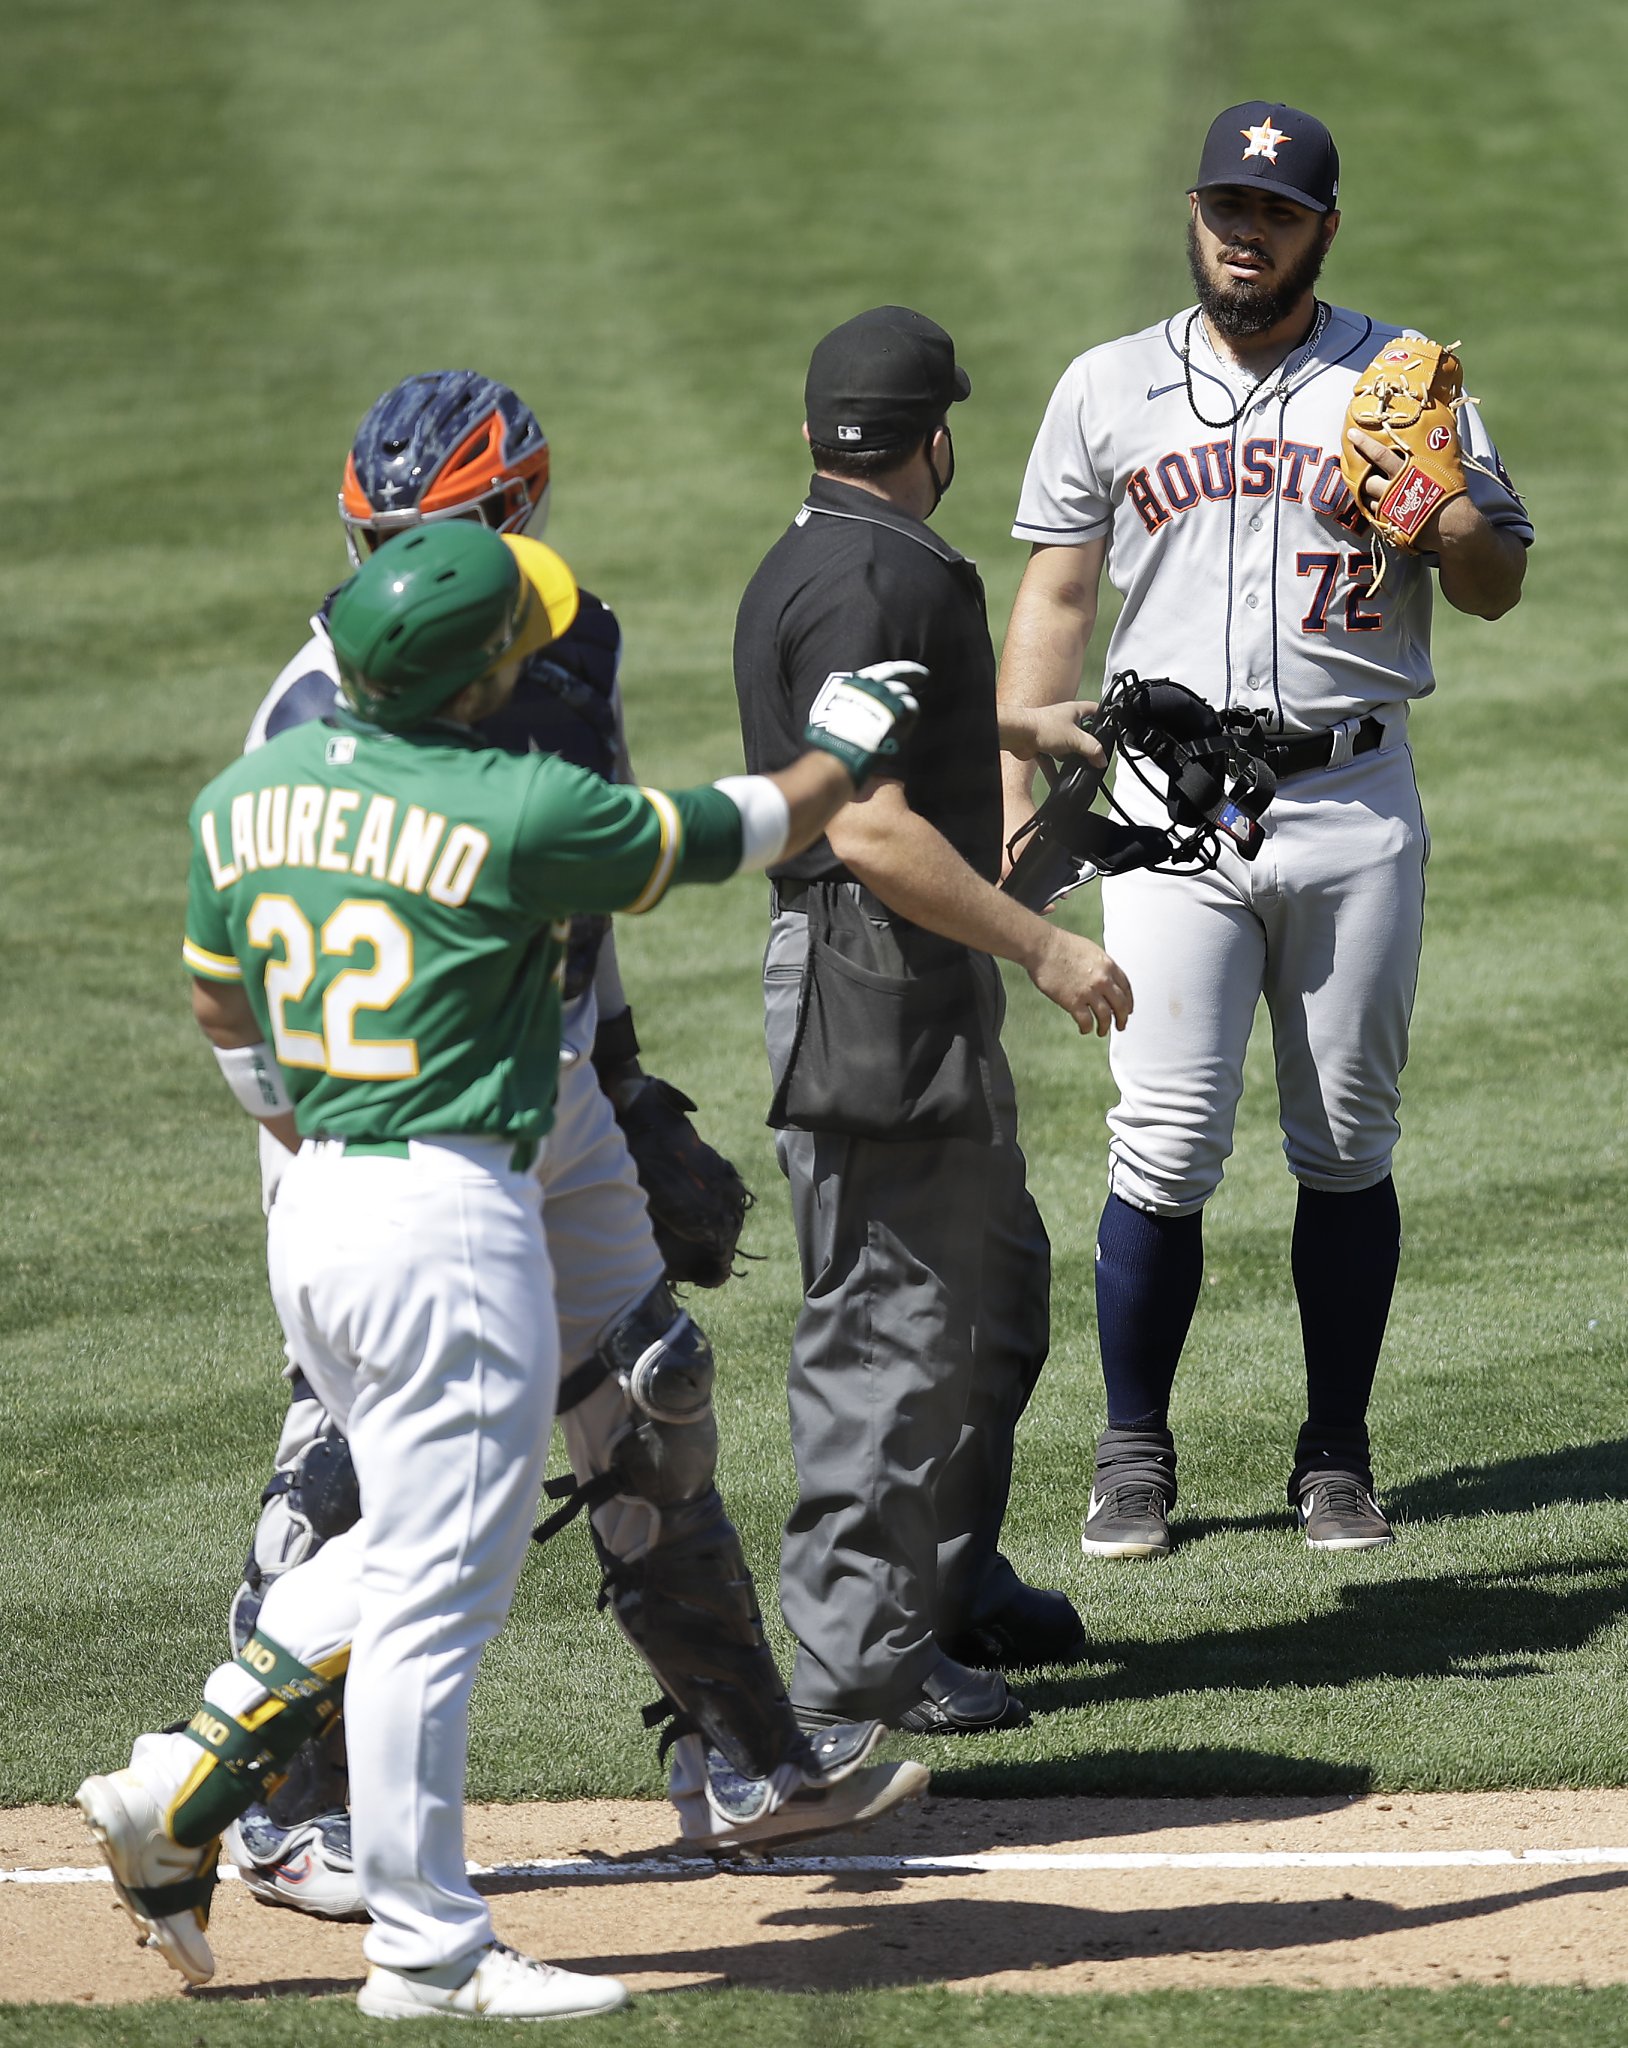 Ramon Laureano on trying to fight Astros hitting coach: 'He's a loser